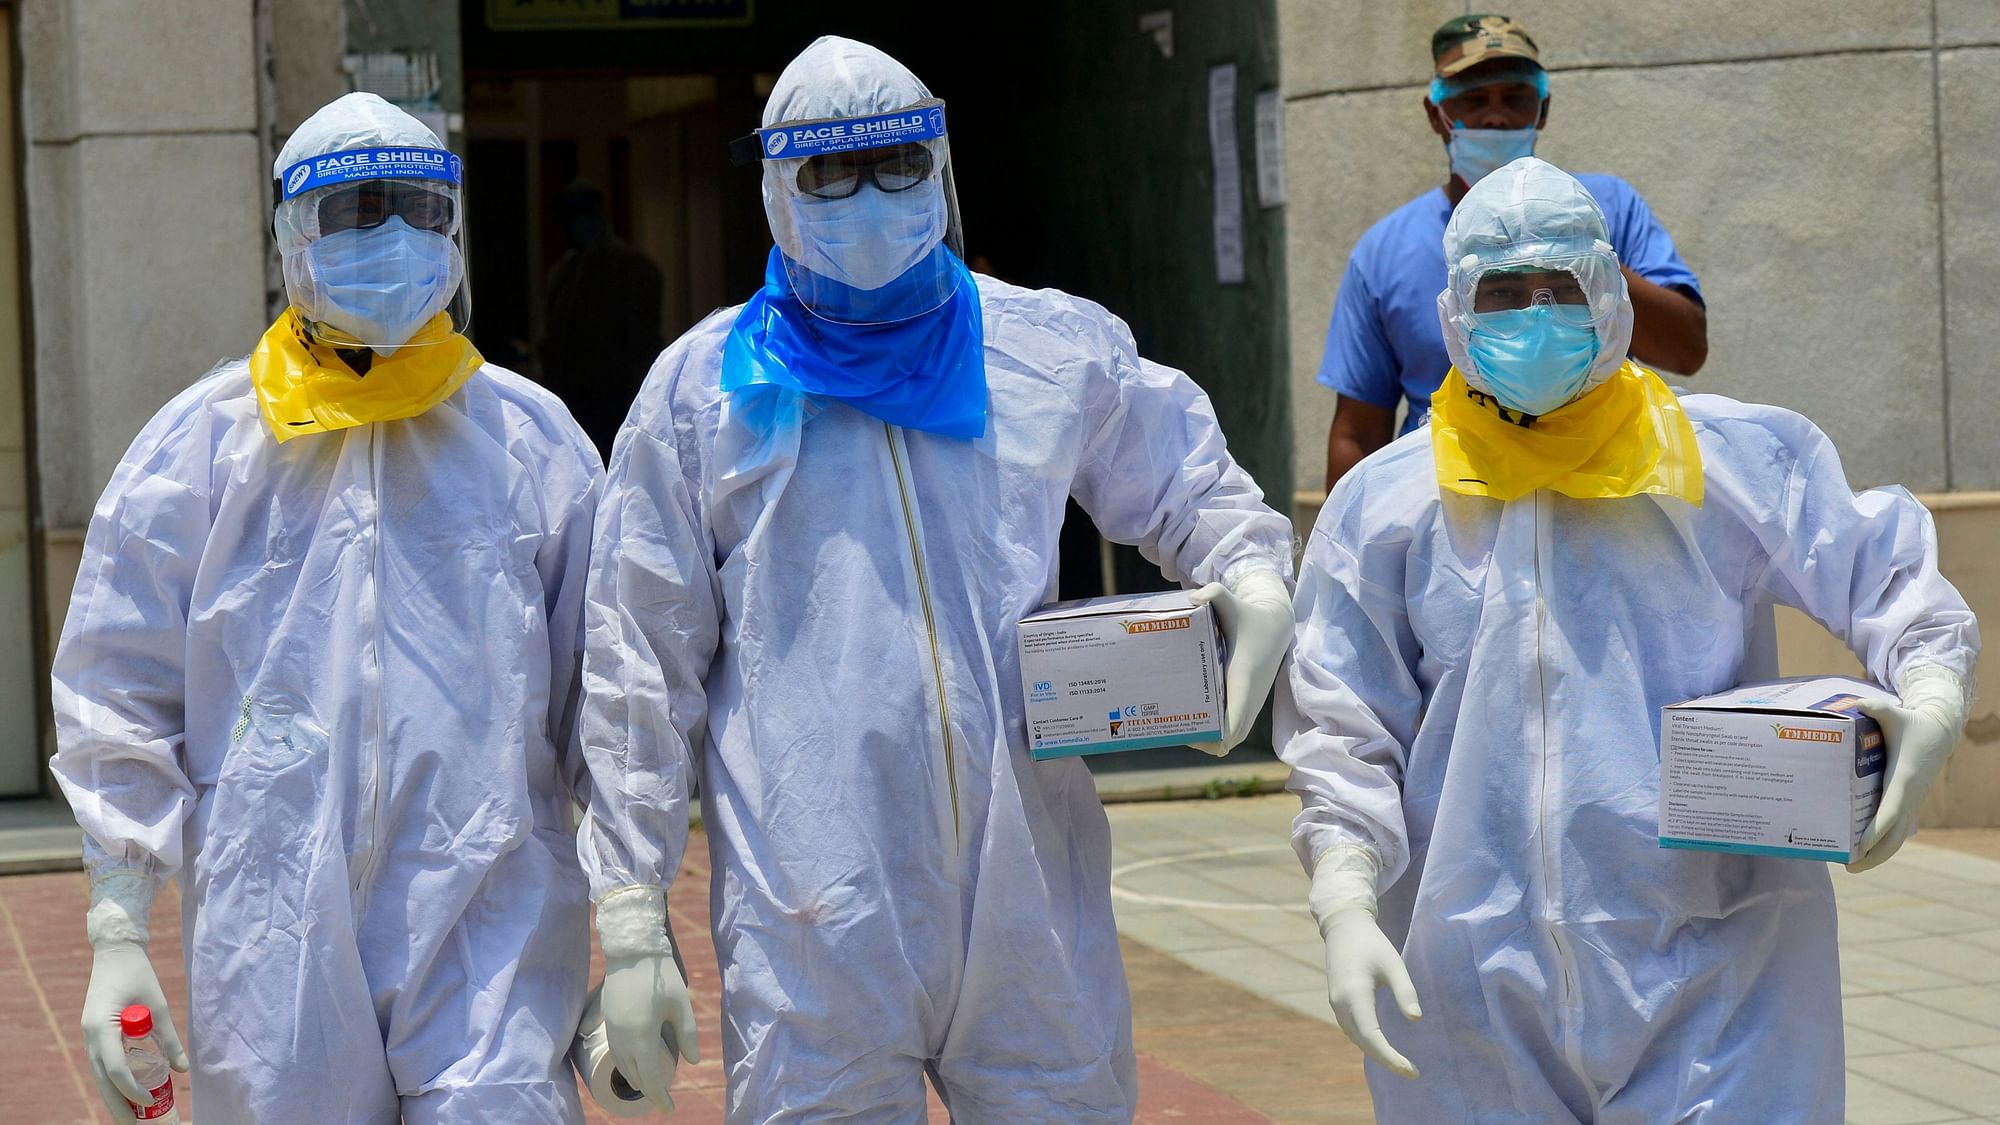 Medics arrive to take samples of suspected COVID-19 patients for lab tests at a government hospital in New Delhi.